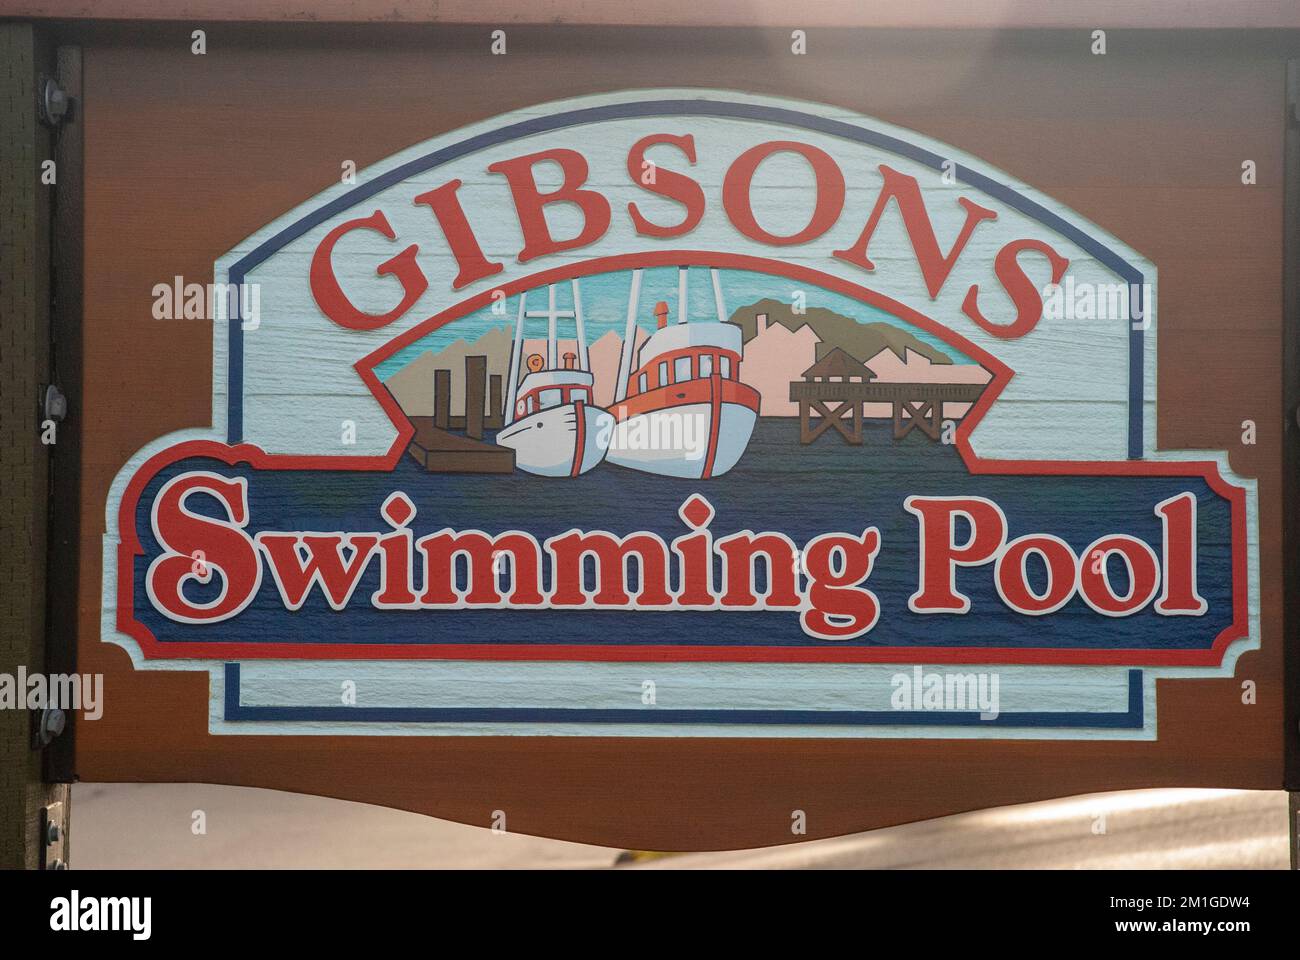 Gibsons Swimming Pool sign in Gibsons, British Columbia, Canada Stock Photo